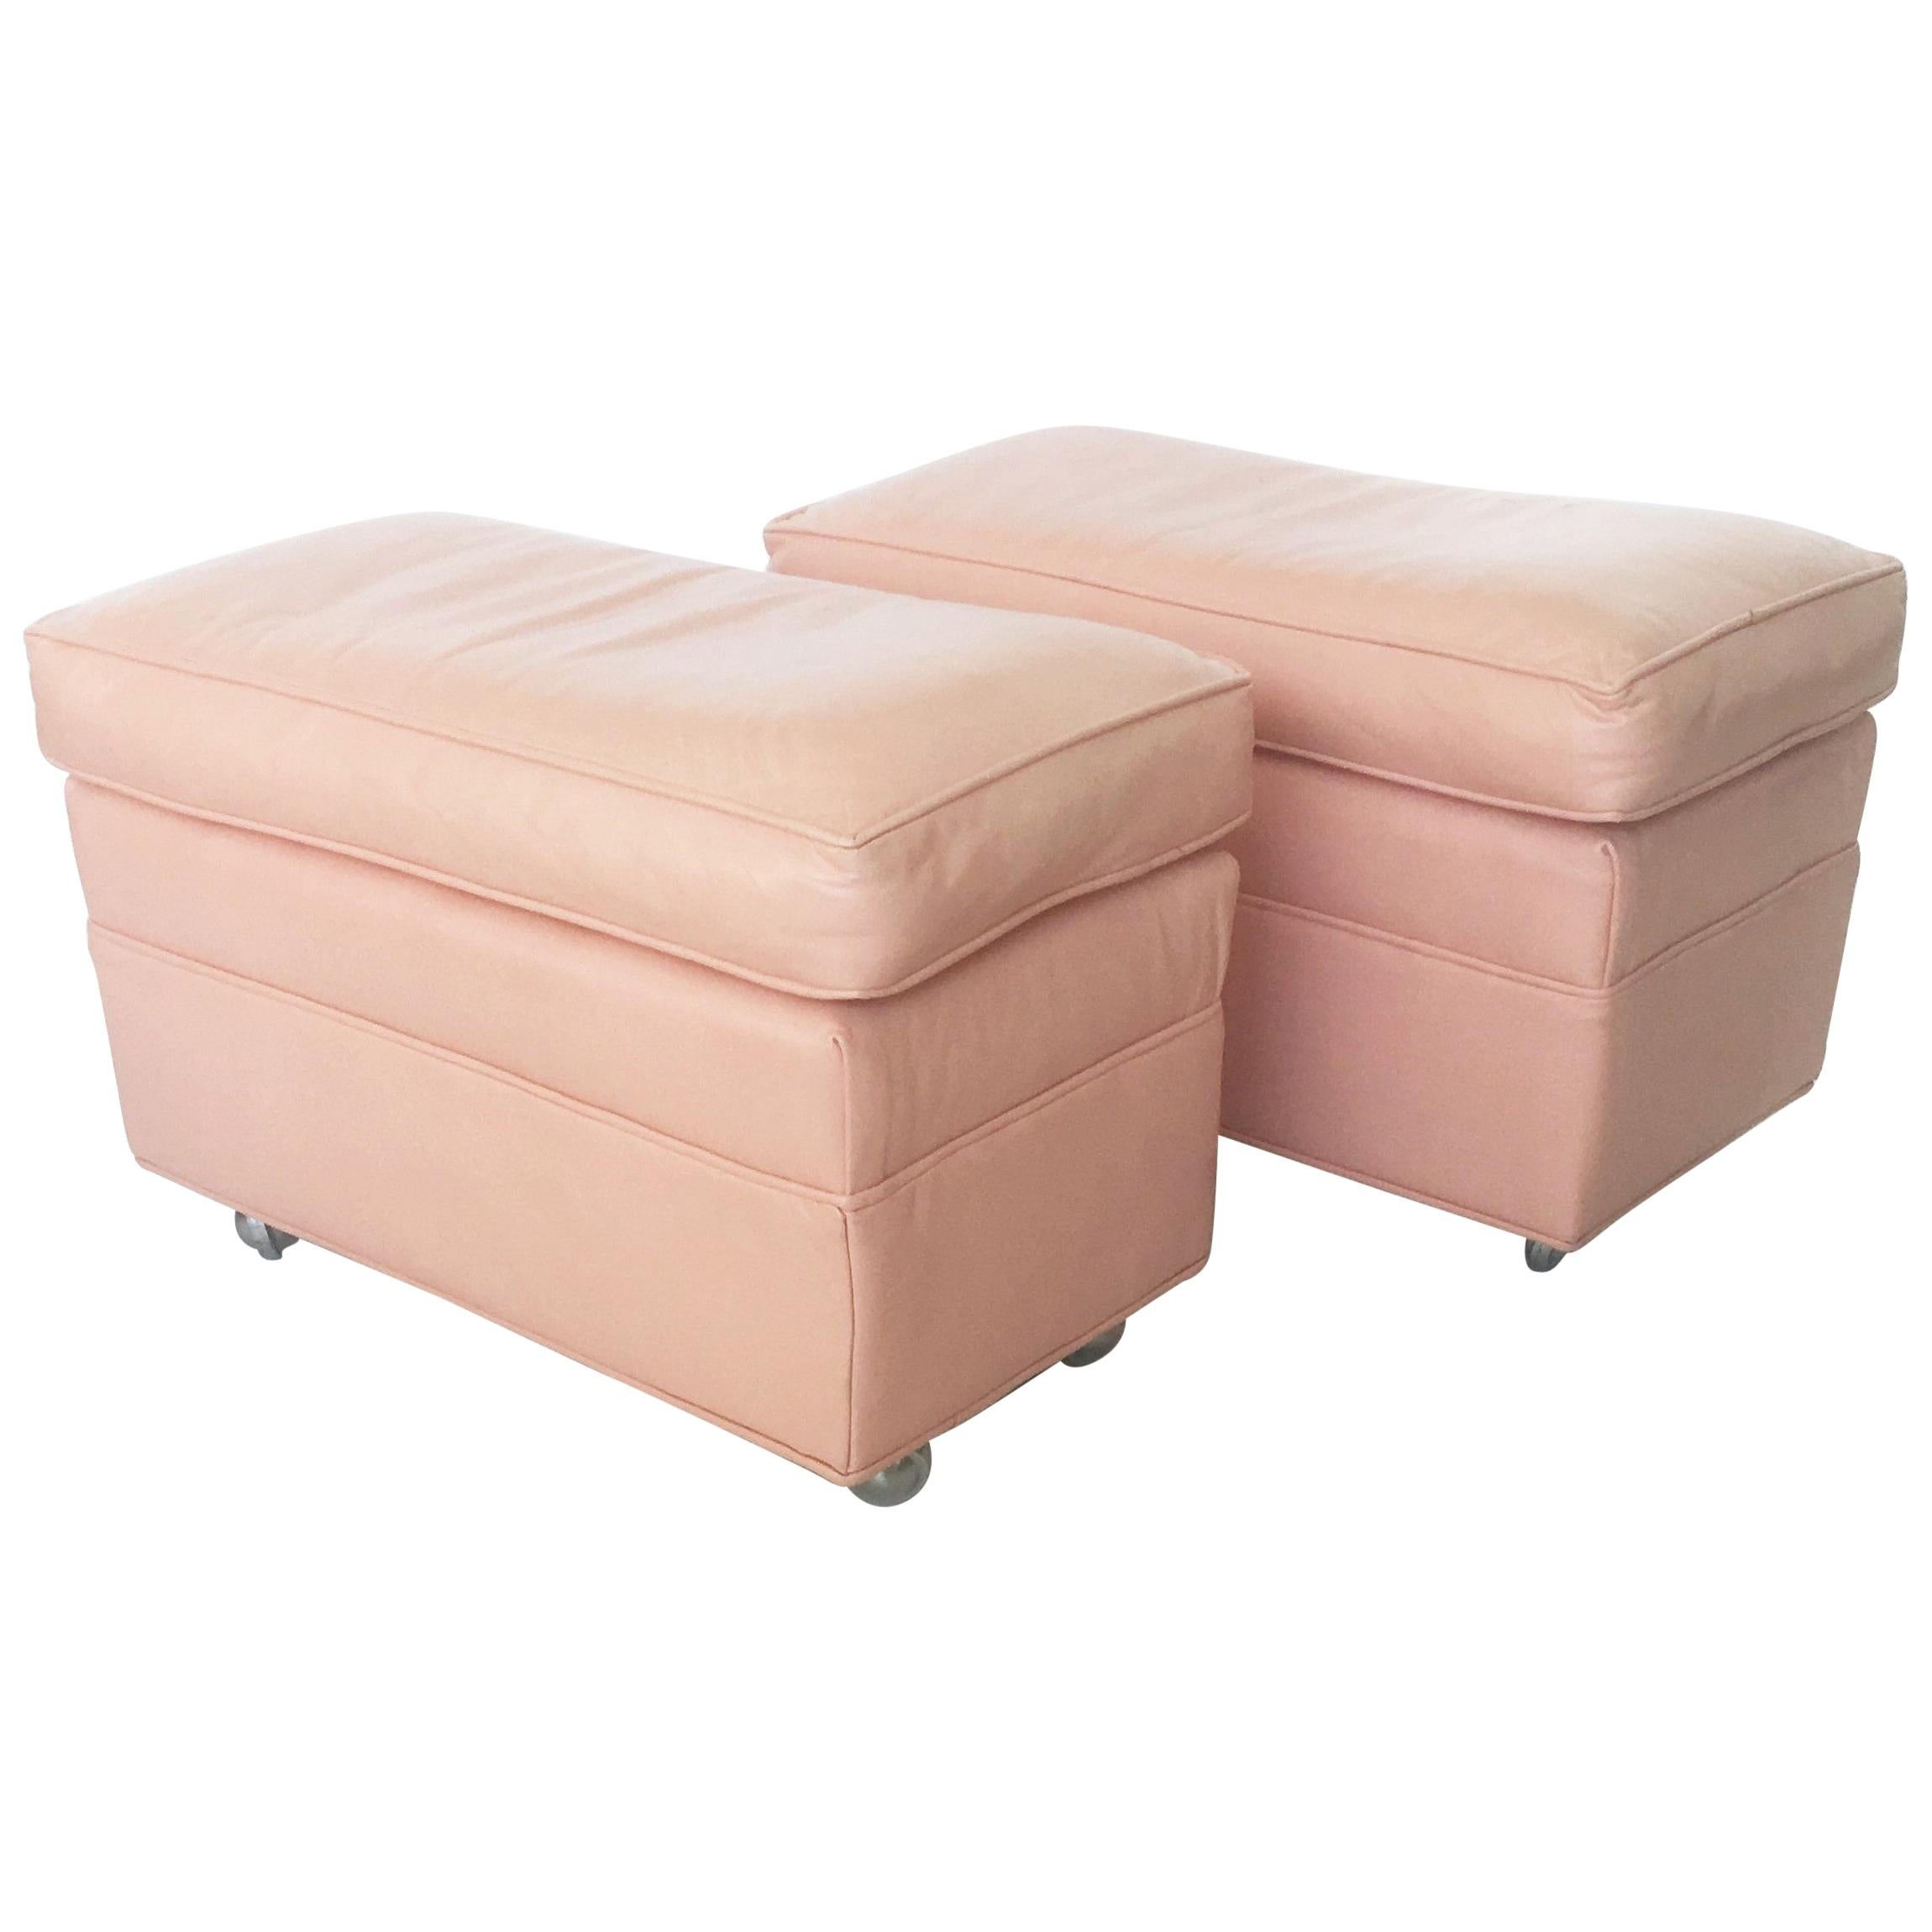 Pair of Mid-Century Modern Pink Ombre Leather Ottomans on Casters For Sale